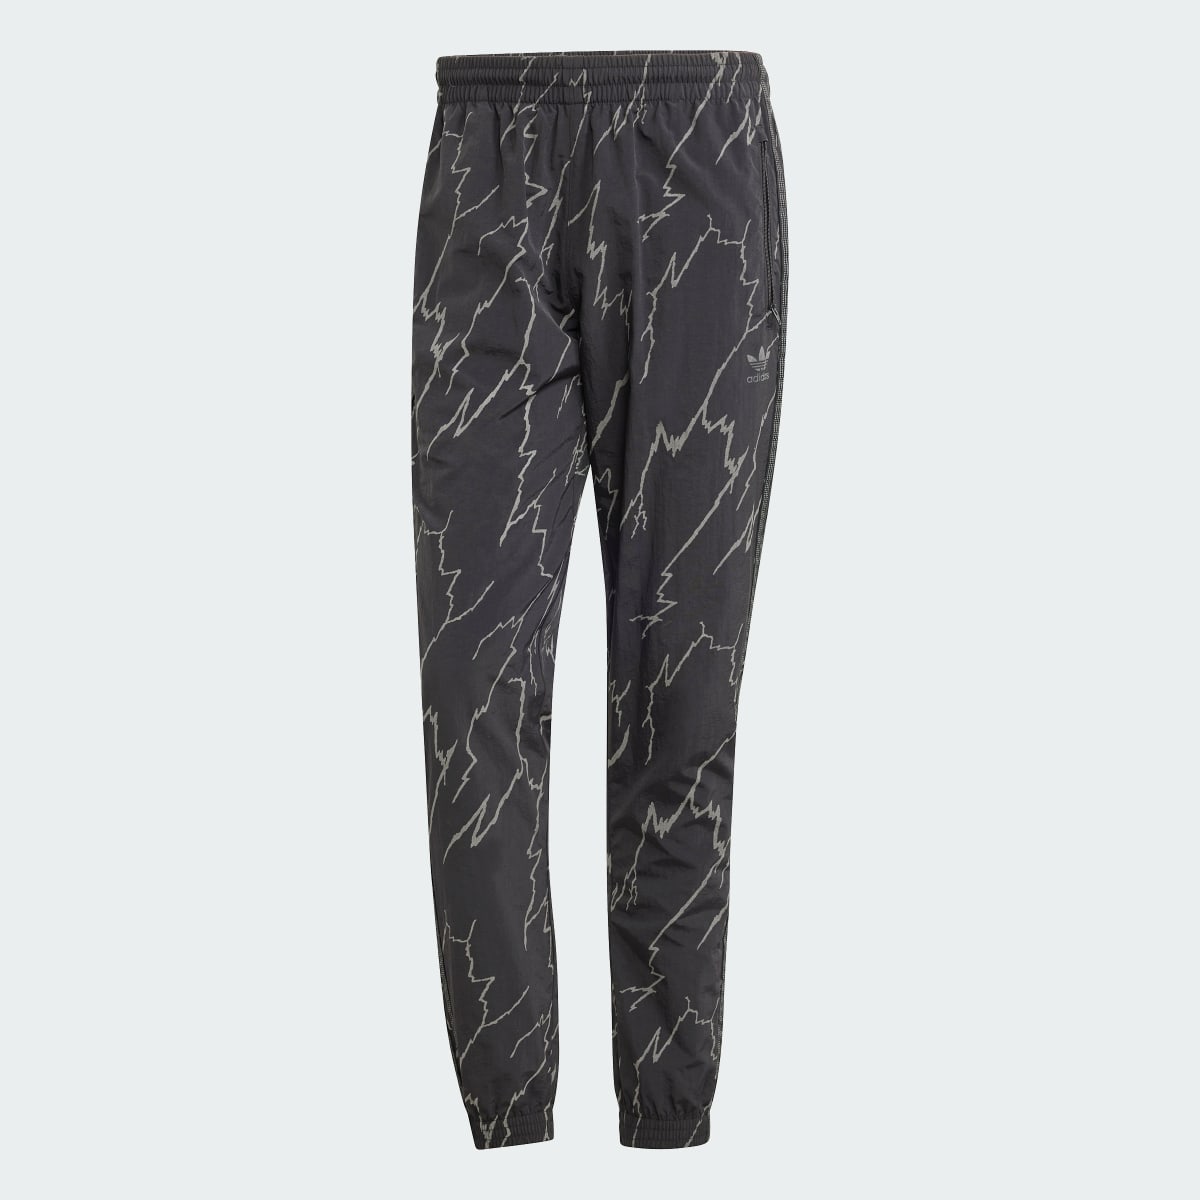 Adidas Track pants Allover Print SST. 5